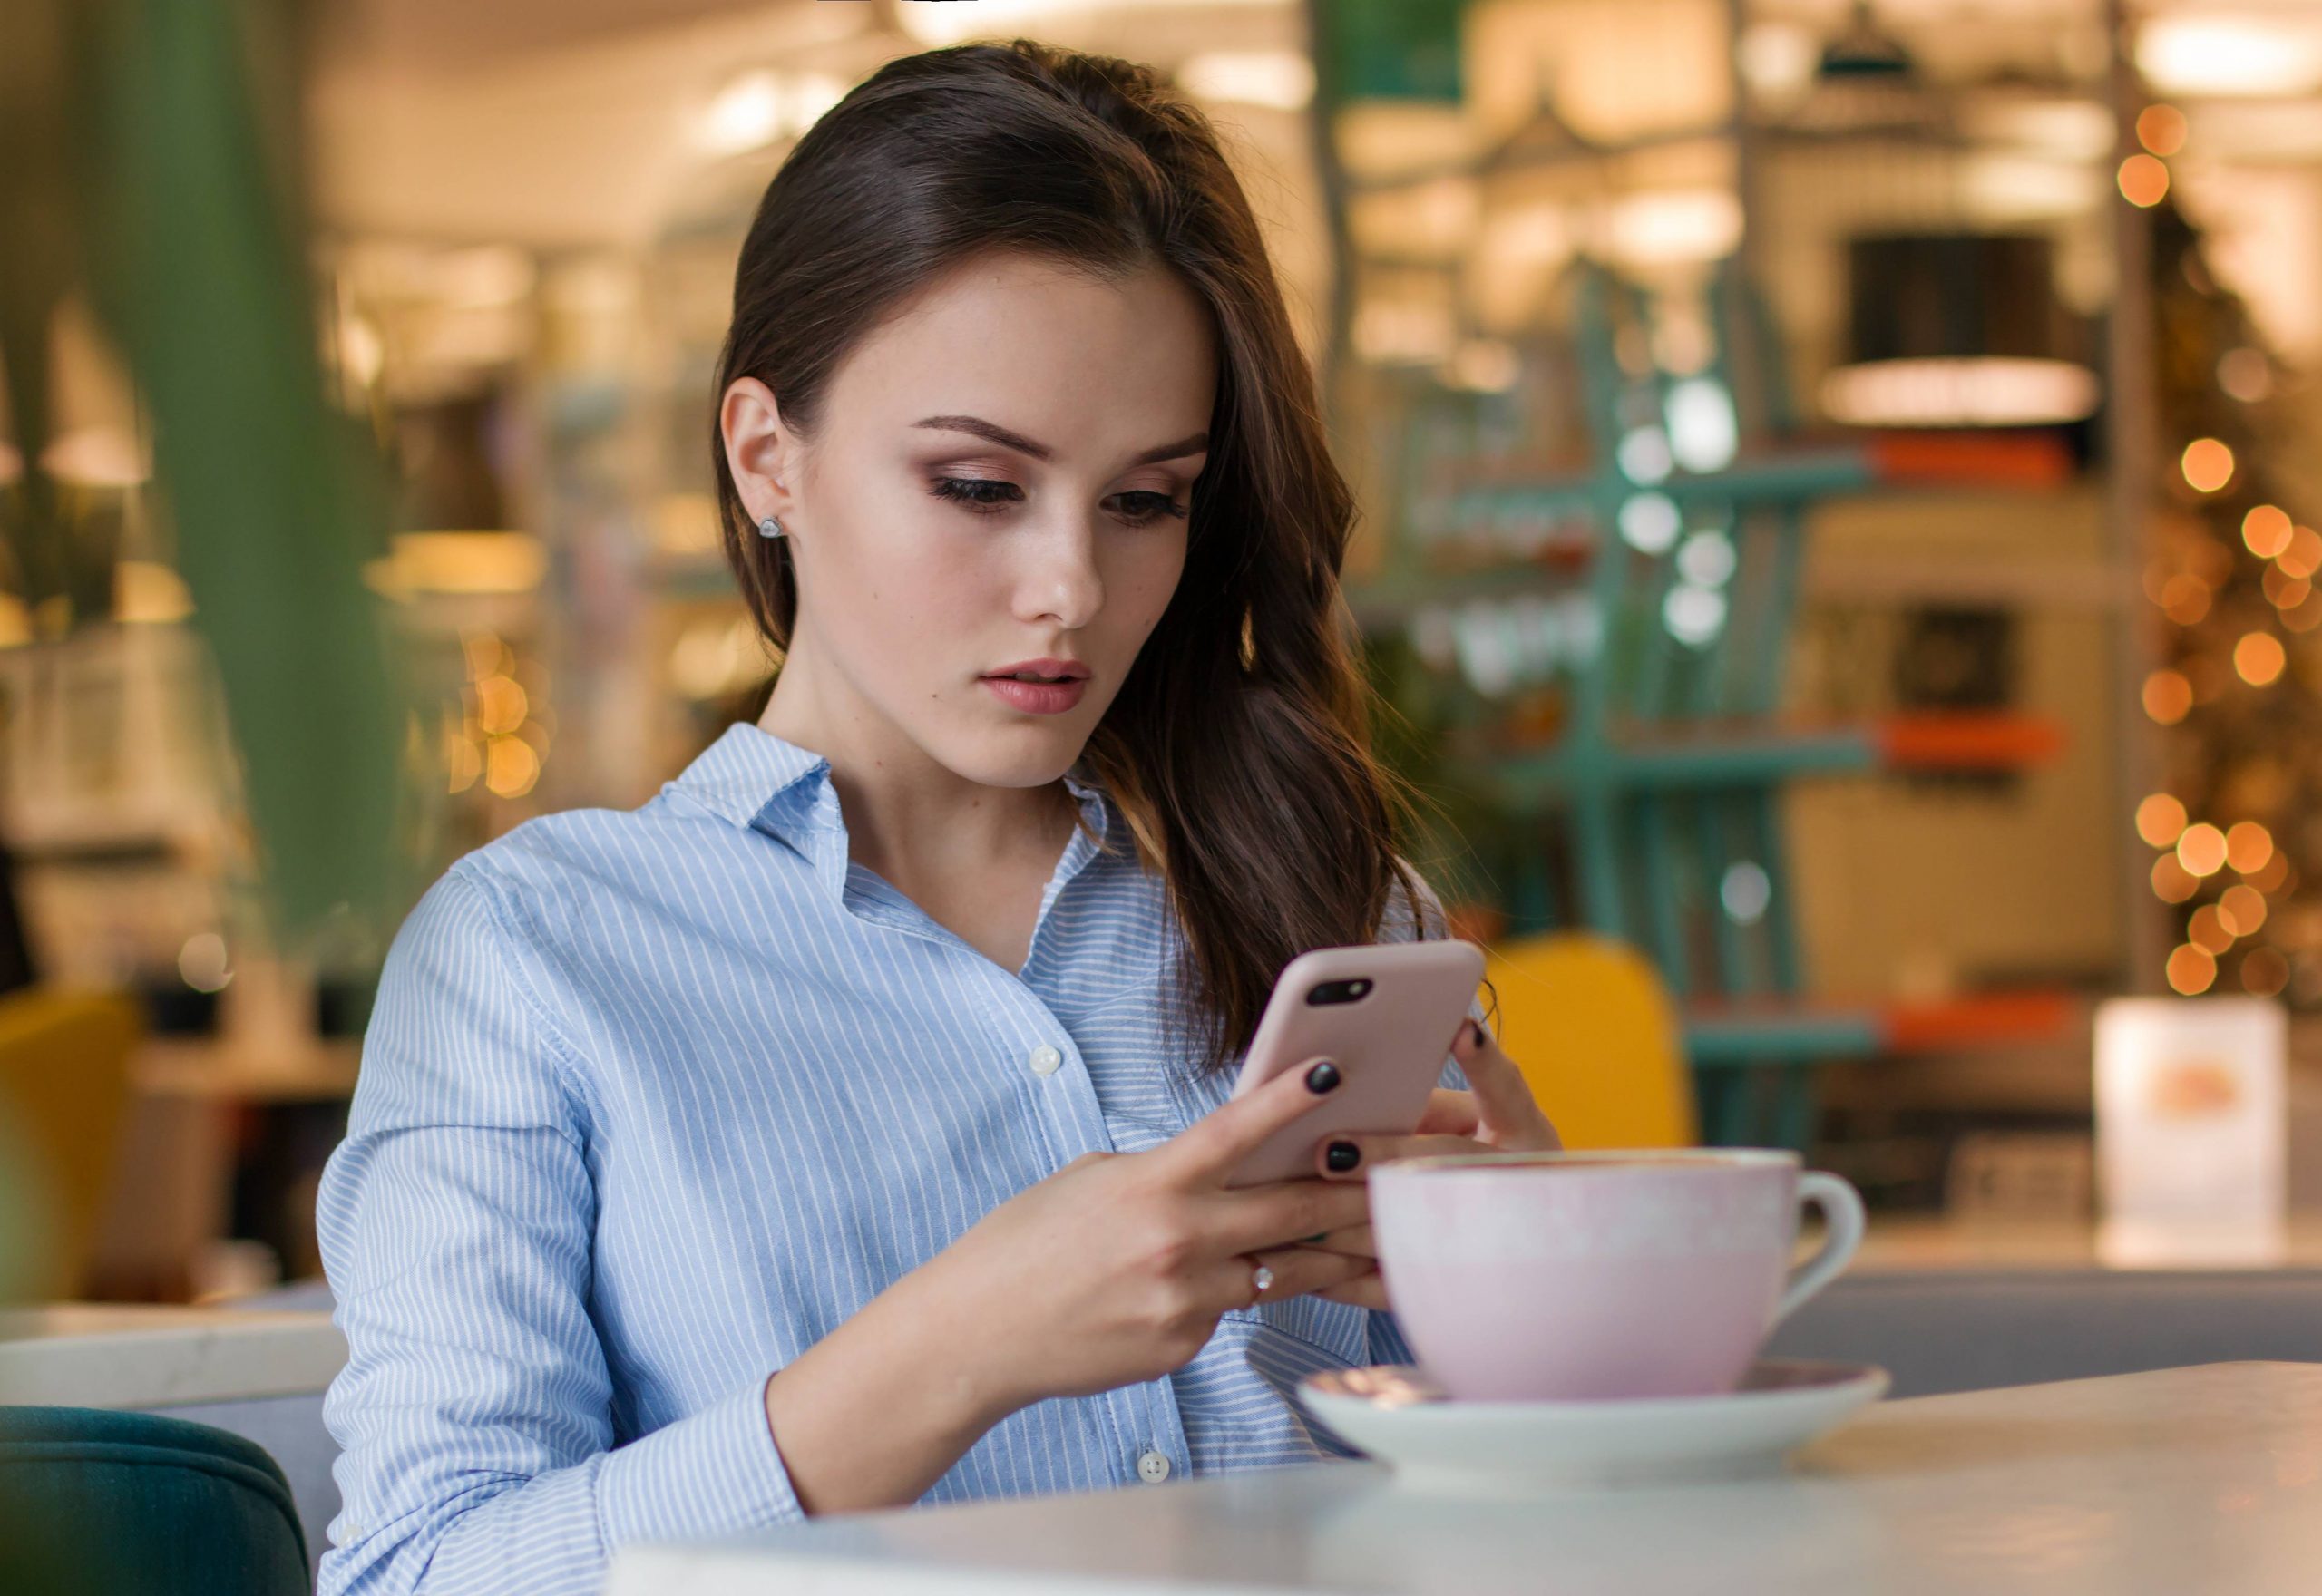 8 Things Your Ex Should Never See in Your Text Messages